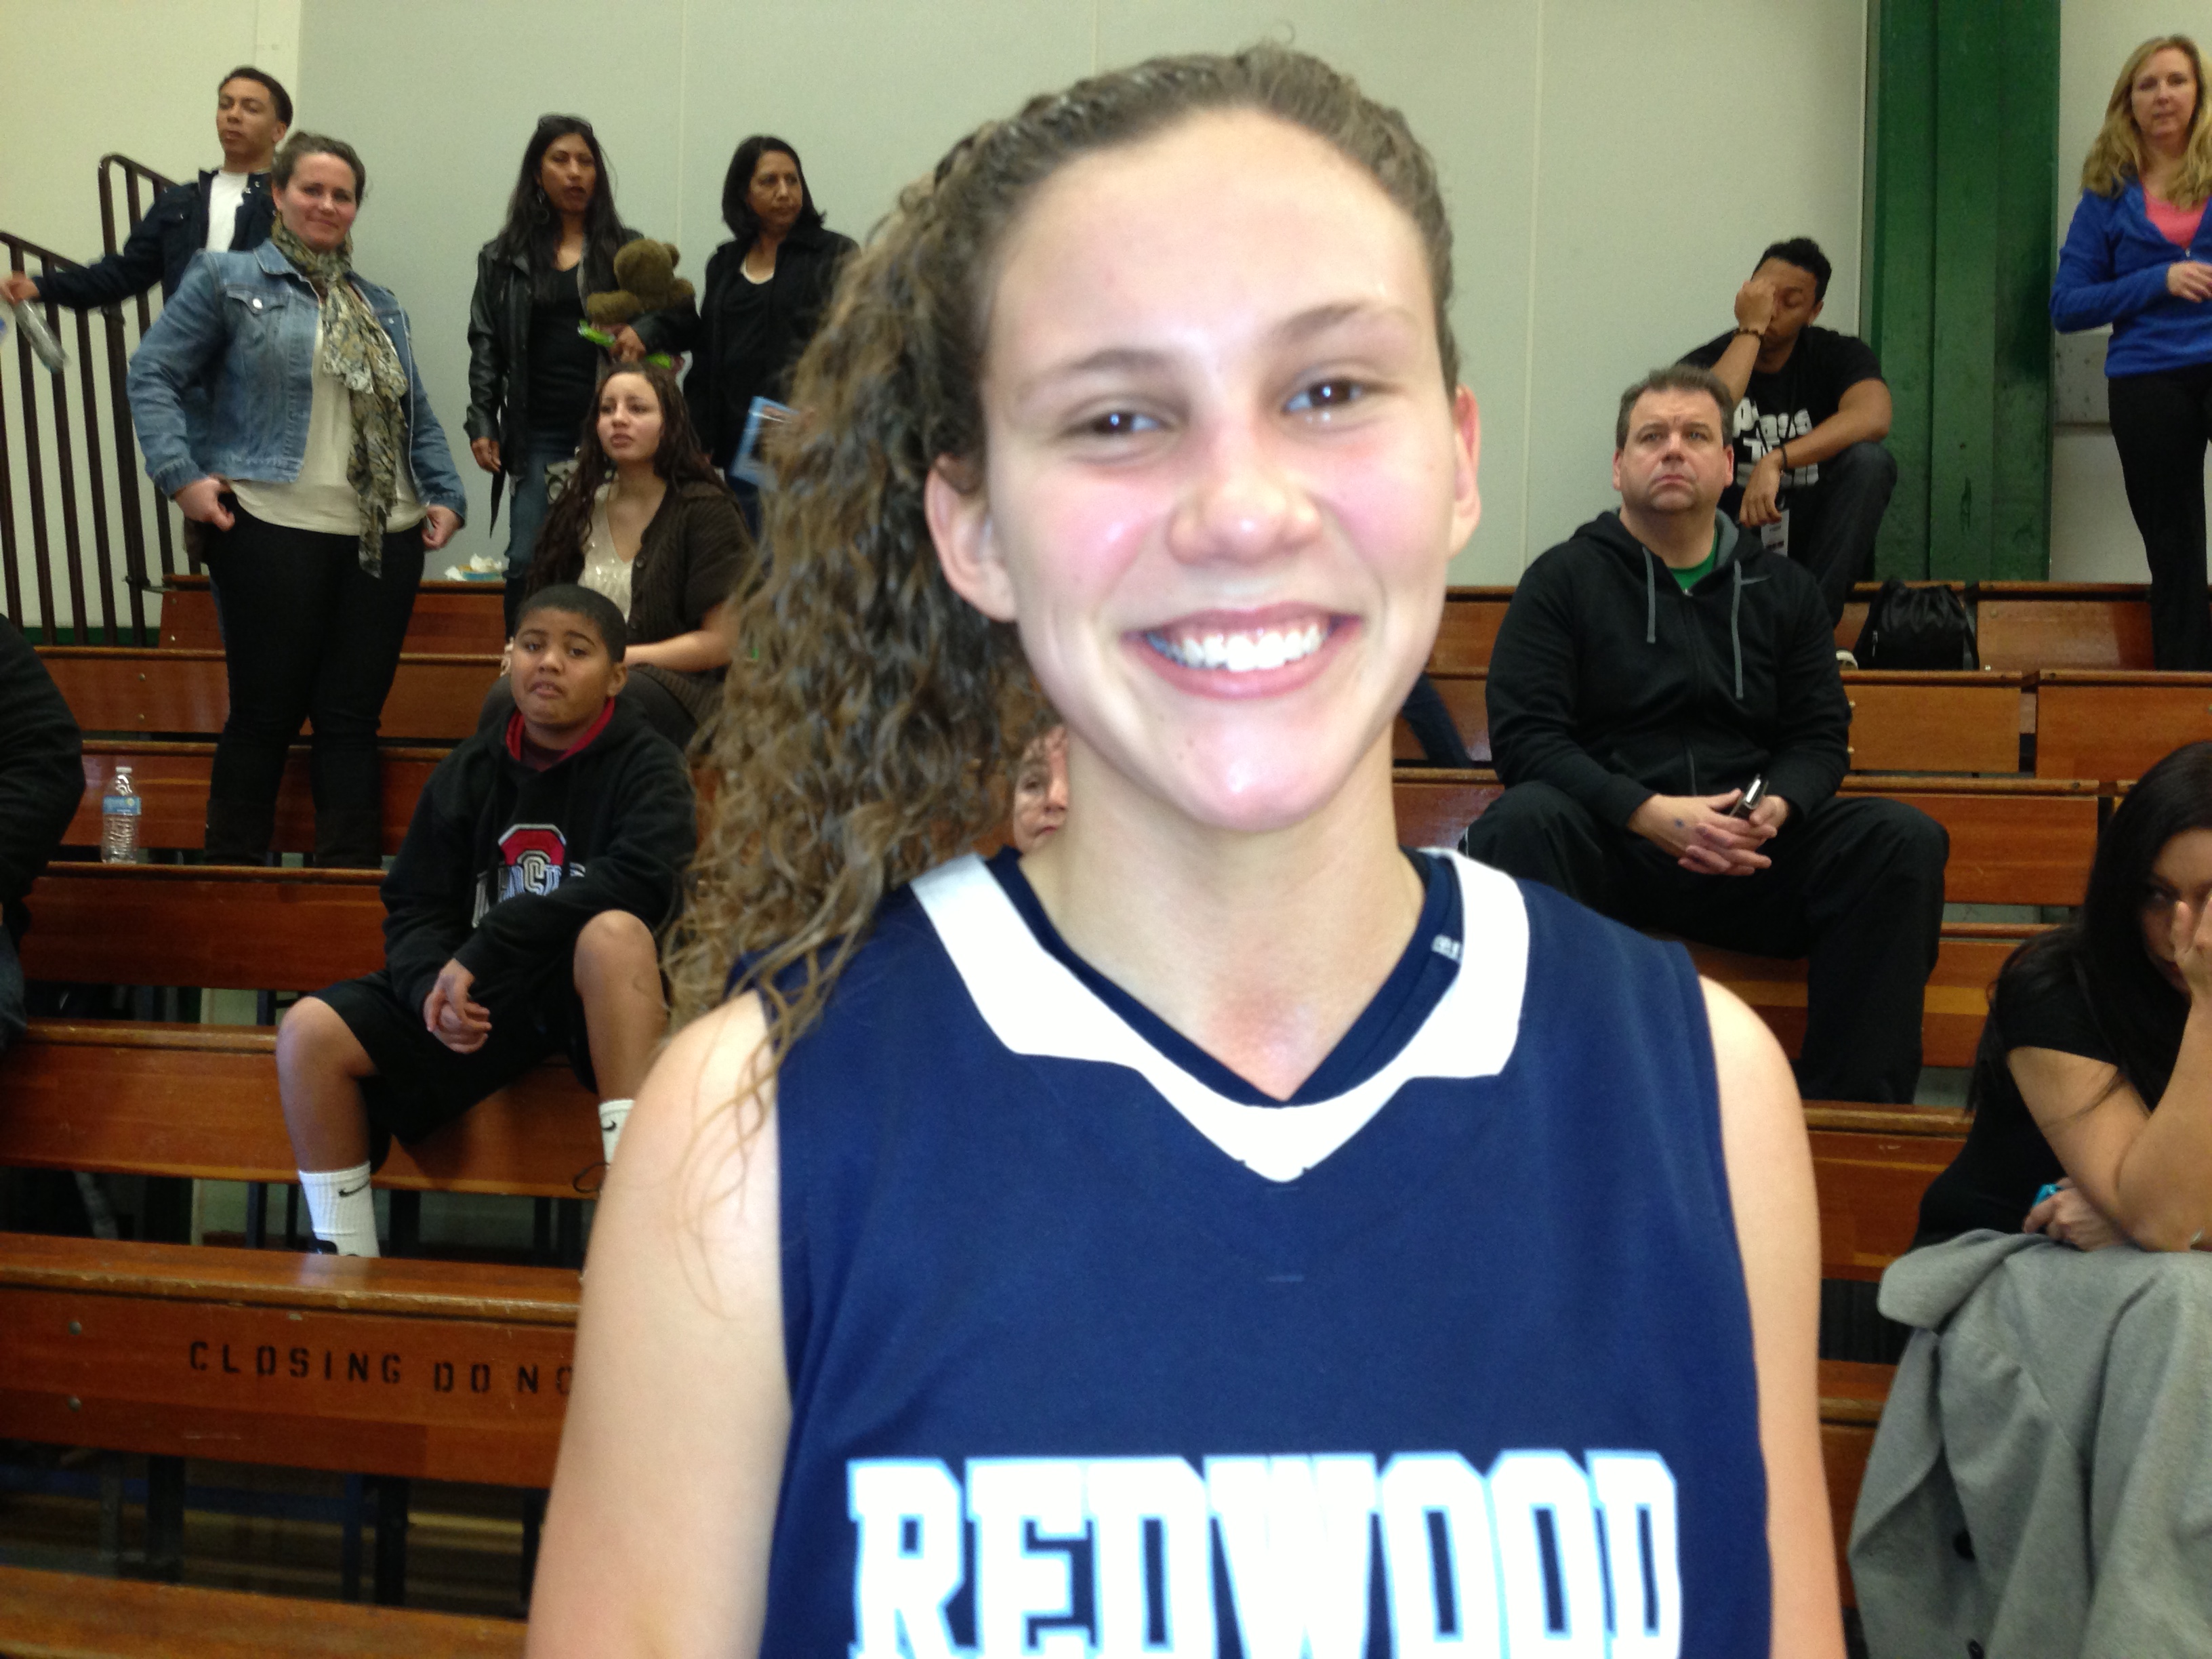 Corissa Turley from Redwood of Visalia is one top player from the CIF Central Section's West Yosemite League who is not from Hanford. She connected for 34 points in game last week. Photo: Harold Abend.